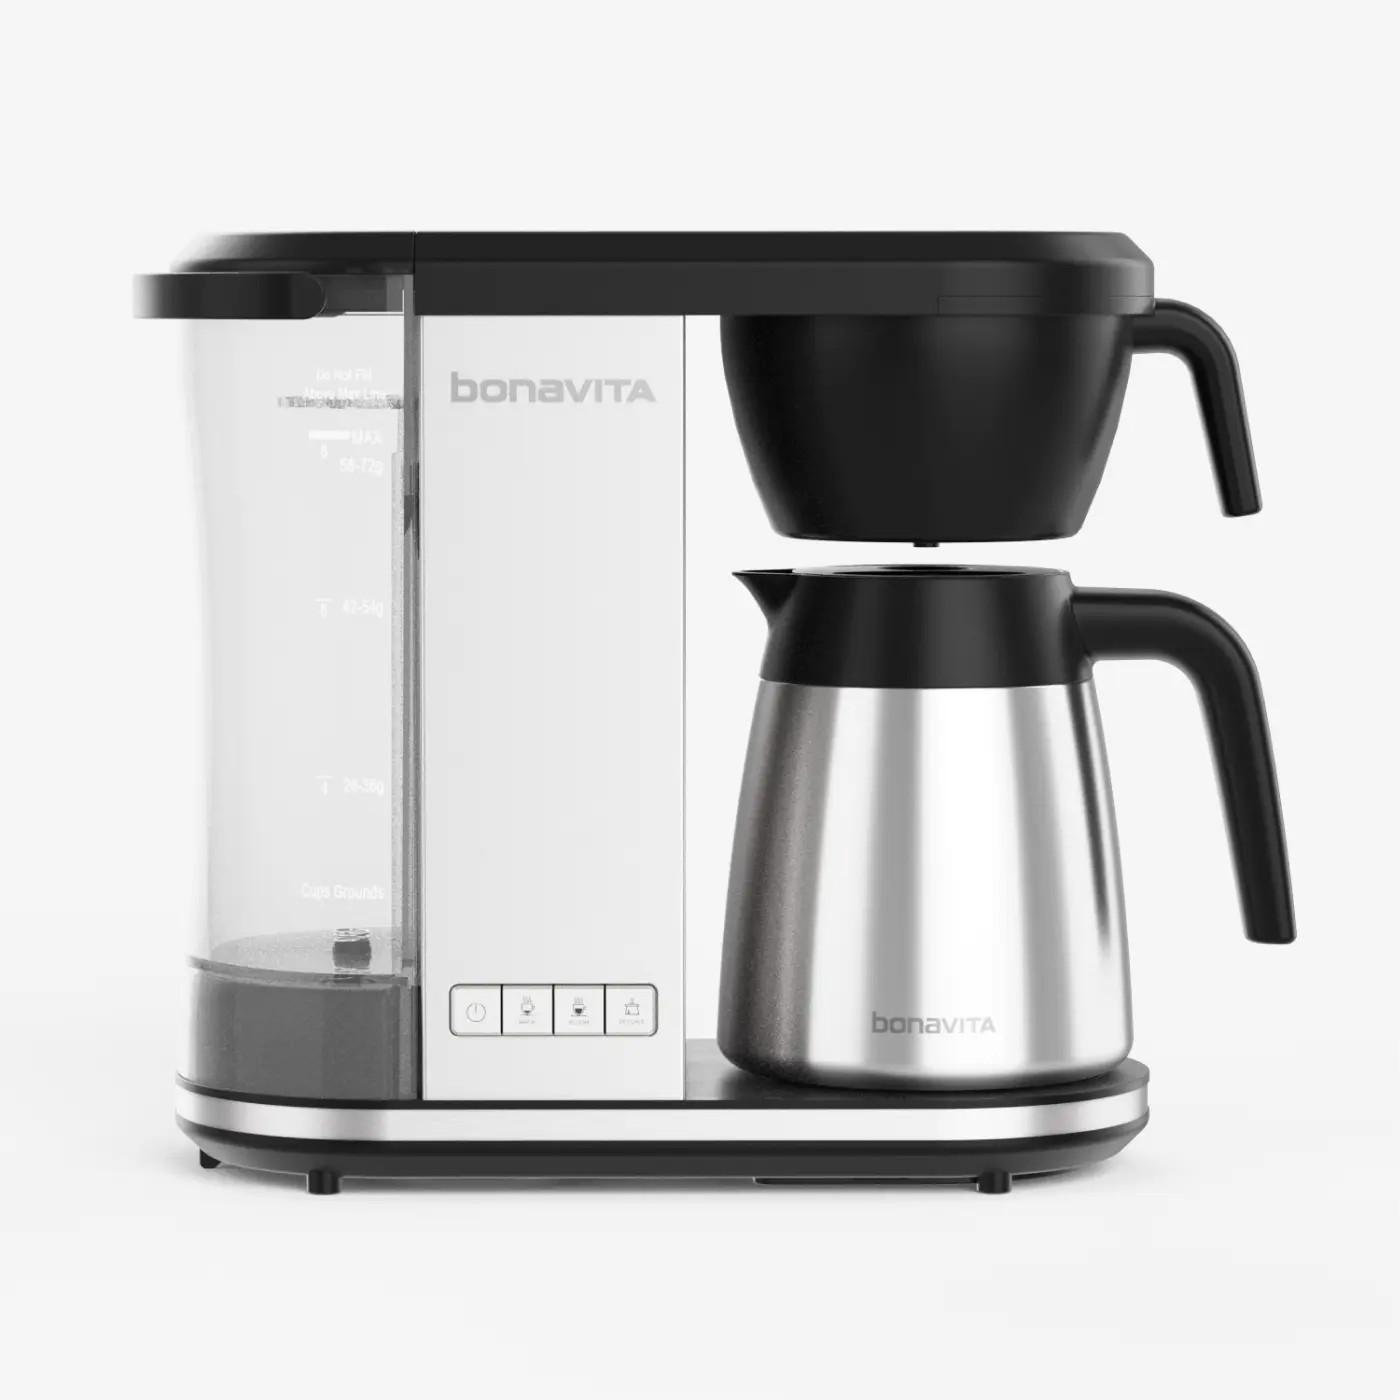 How to Clean an Electric Turkish coffee Maker, by Smart Line